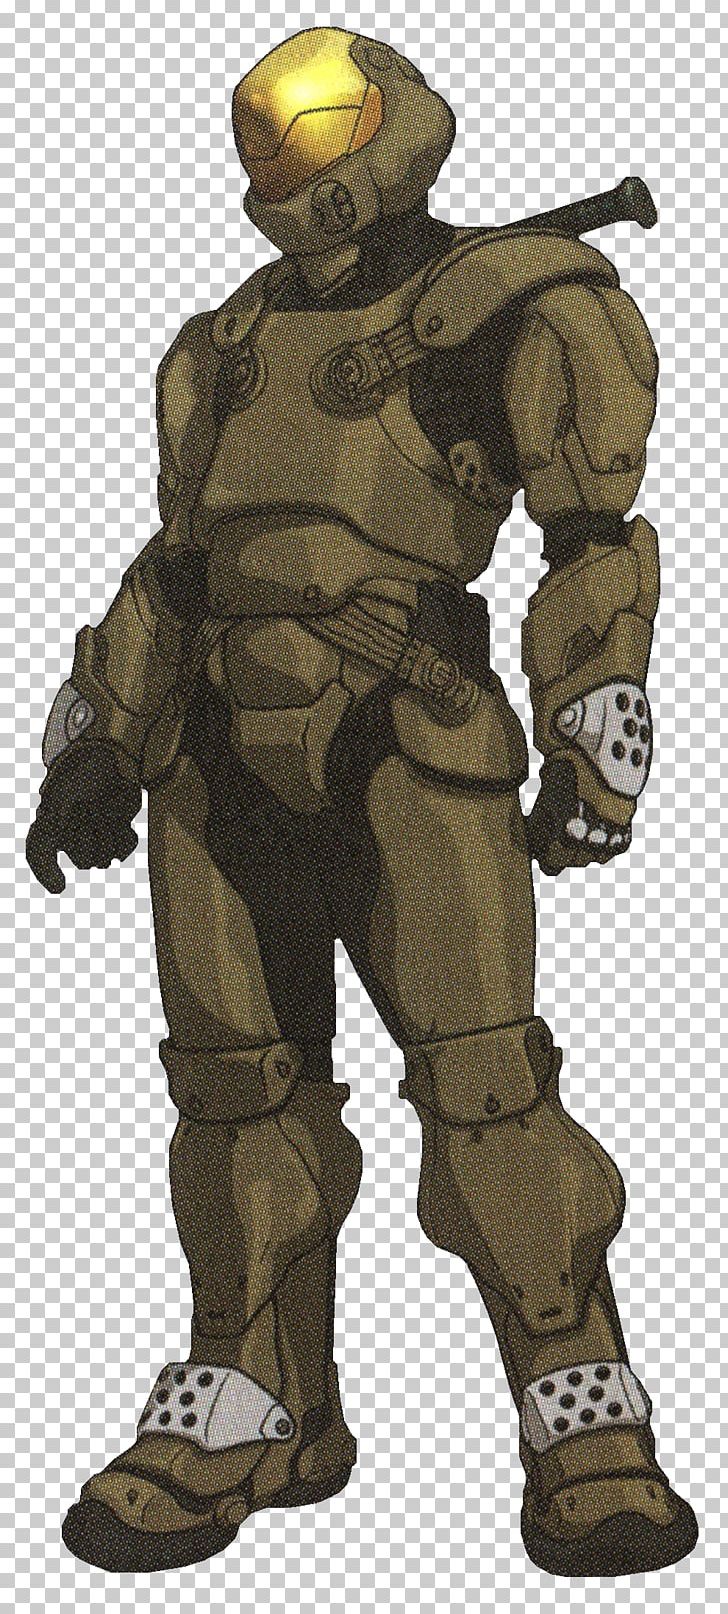 Halo 4 Halo 3: ODST Halo 5: Guardians Halo: Spartan Assault PNG, Clipart, Armor, Armour, Body Armor, Fictional Character, Halo Free PNG Download